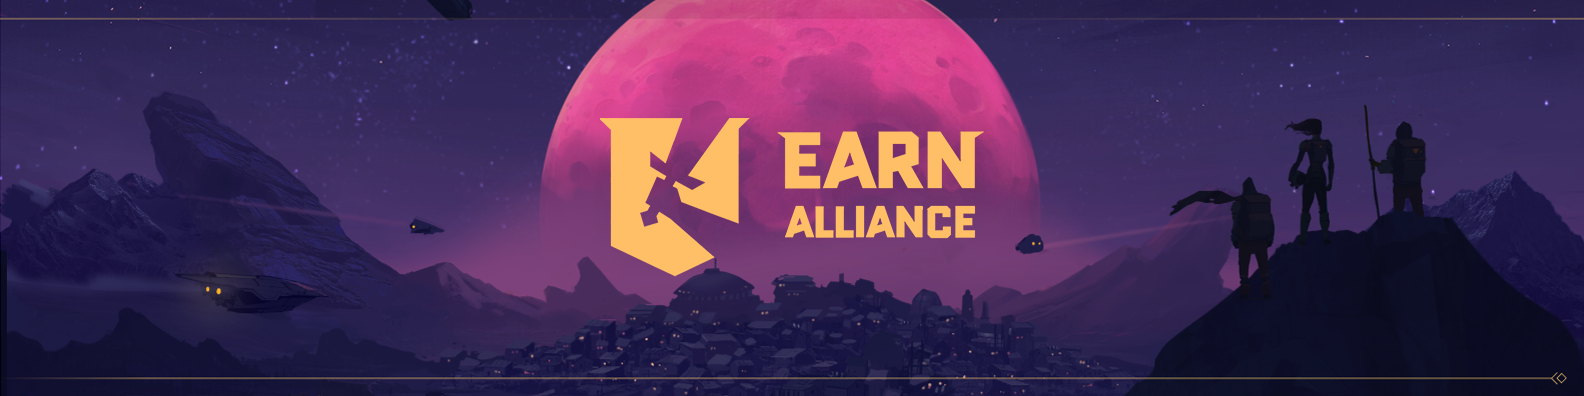 In her new role as Chief Marketing Officer at Earn Alliance, Knoller is leading the charge in furthering the platform's mission to connect gamers to games,